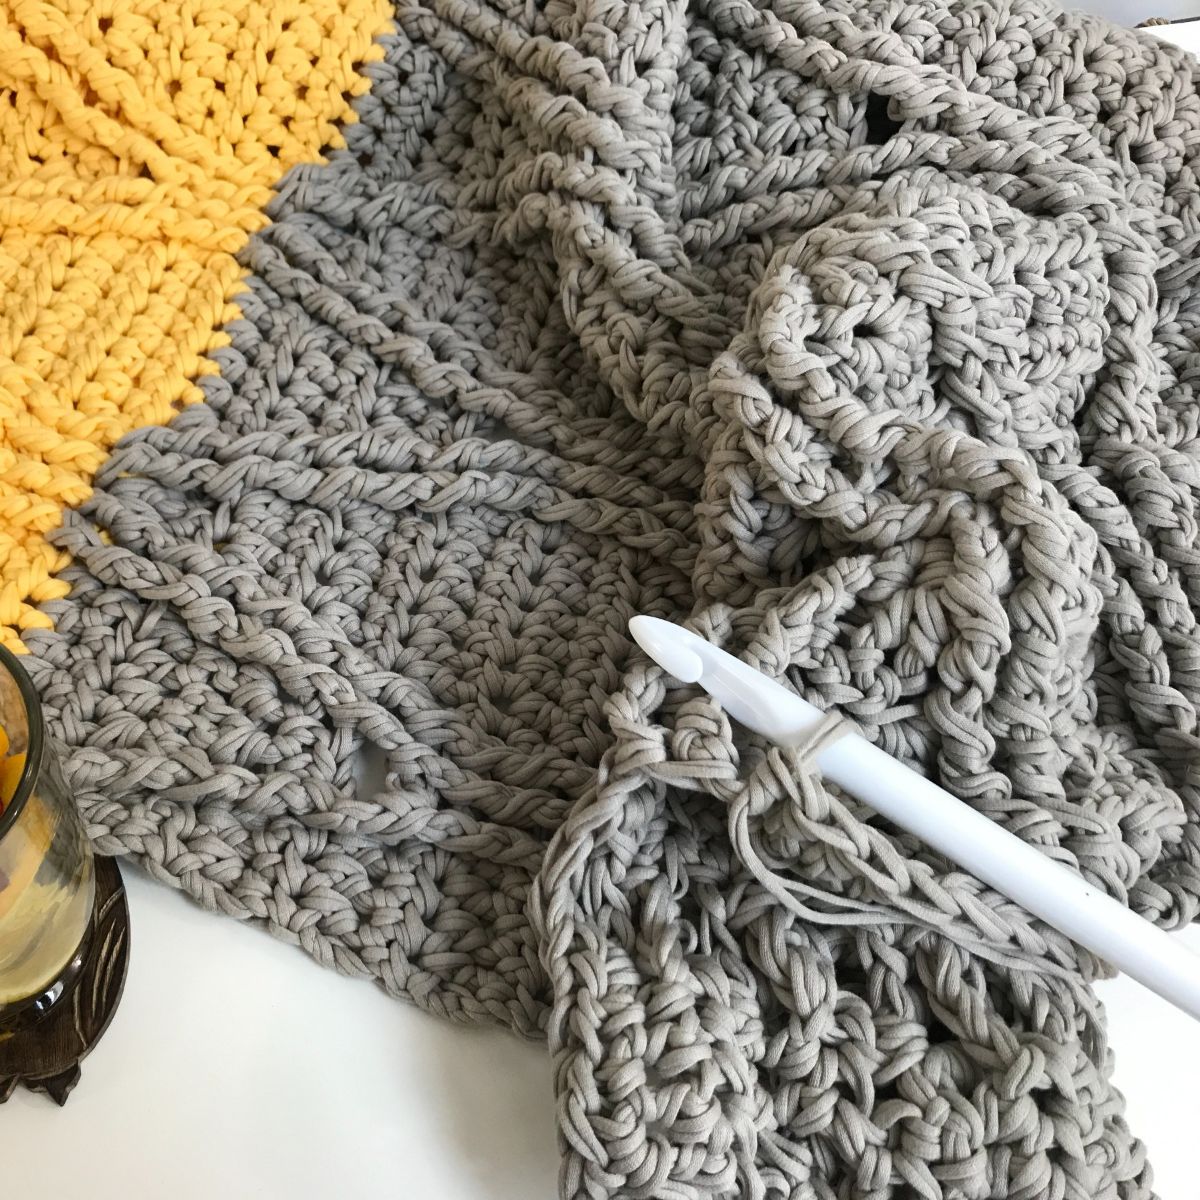 Bernat Maker Home Dec: Yarn Love Review and Giveaway - Moogly